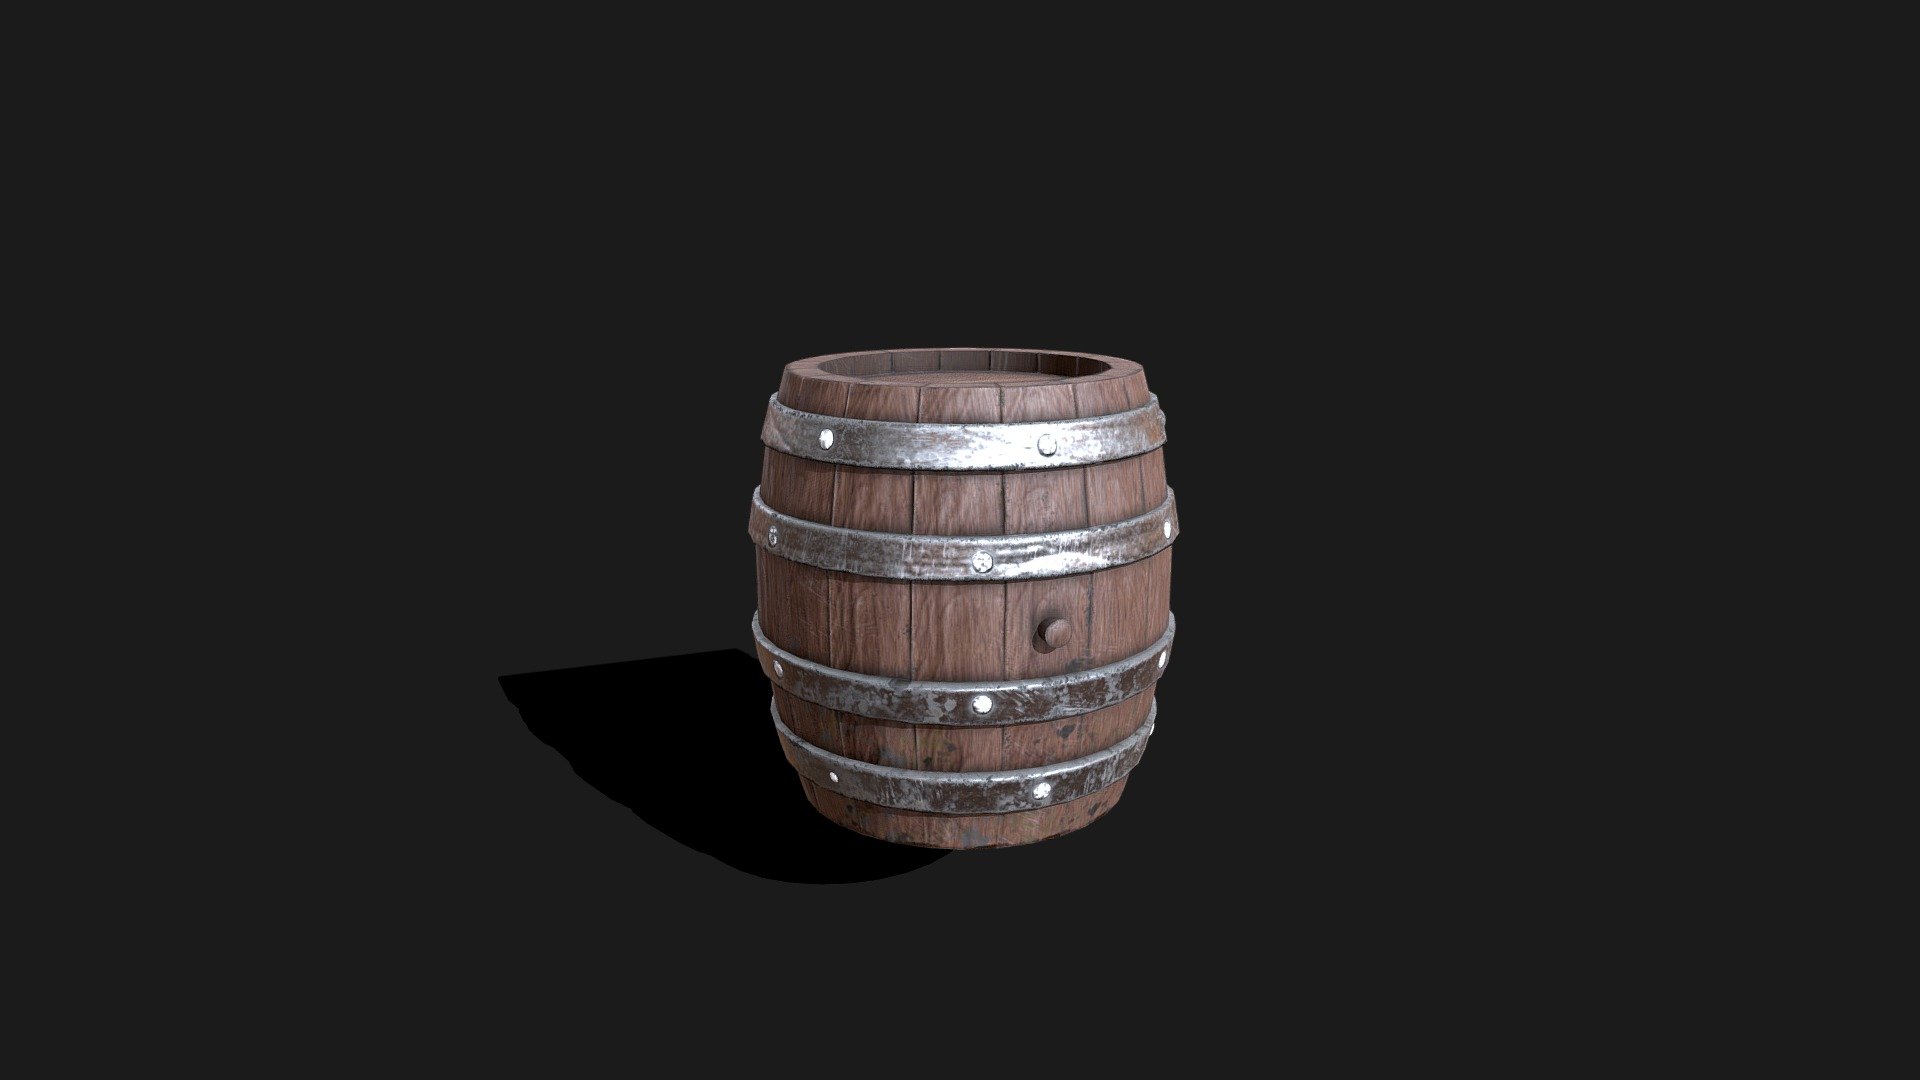 ● Wooden barrel
● Made in Blender
●Textured in Substance painter
● Suitable for garden, storage, ships, pirates, dungeons
● 1 Materials
● Real world scale
● Game ready - Barrel low poly - Buy Royalty Free 3D model by Nataliia_Ch 3d model